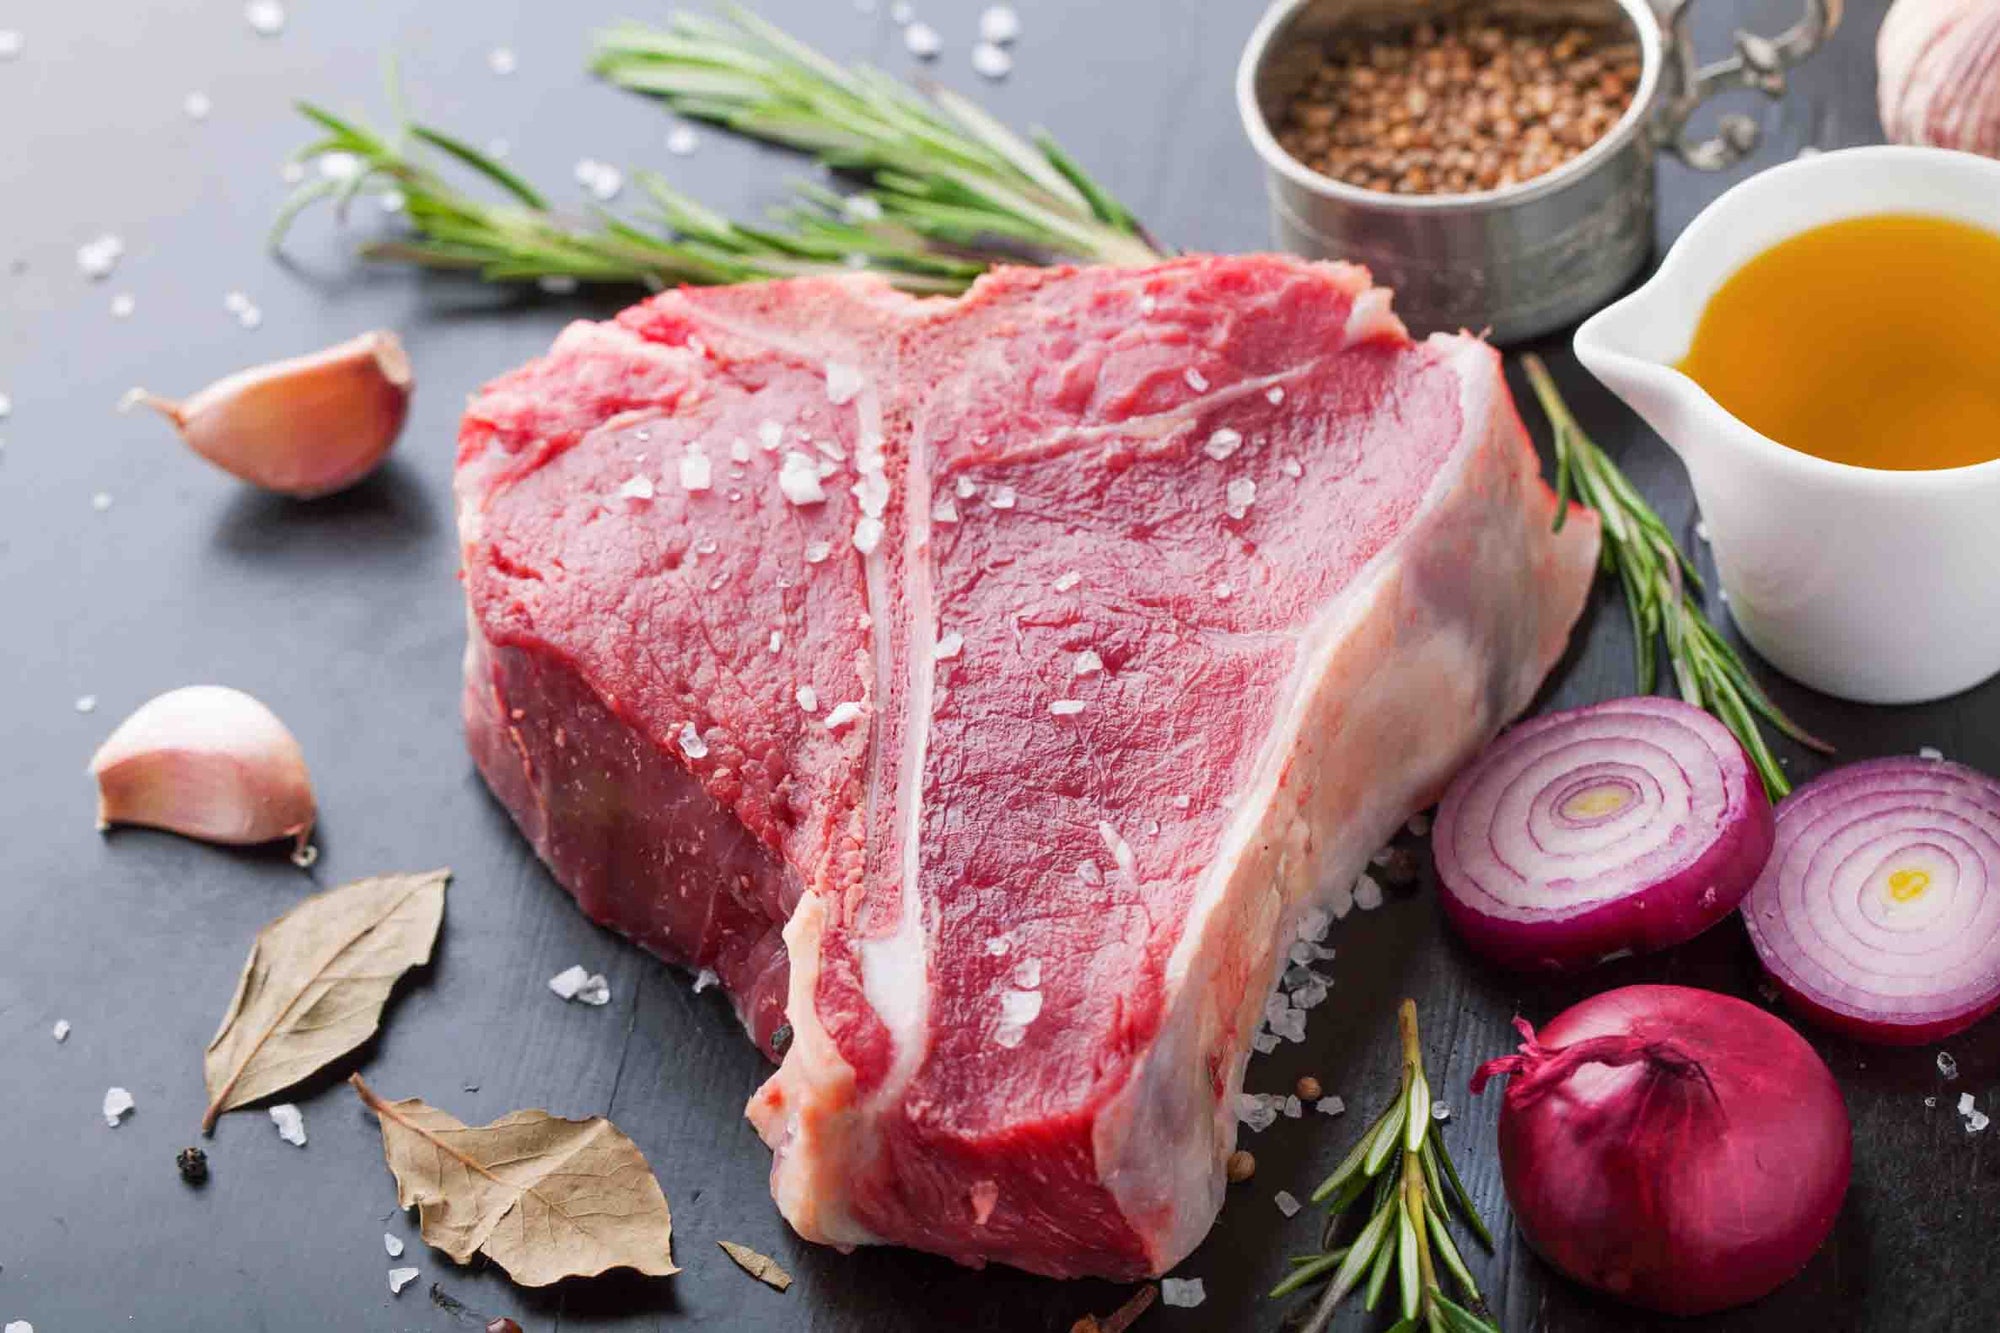 Northstar Bison fresh bison cut cuts delivery 100% grass fed and finished as nature intended amazon prime never frozen grind fast order buffalo next day shipping non-gmo soy free corn-free gluten-free boneless freshest bison steak steaks